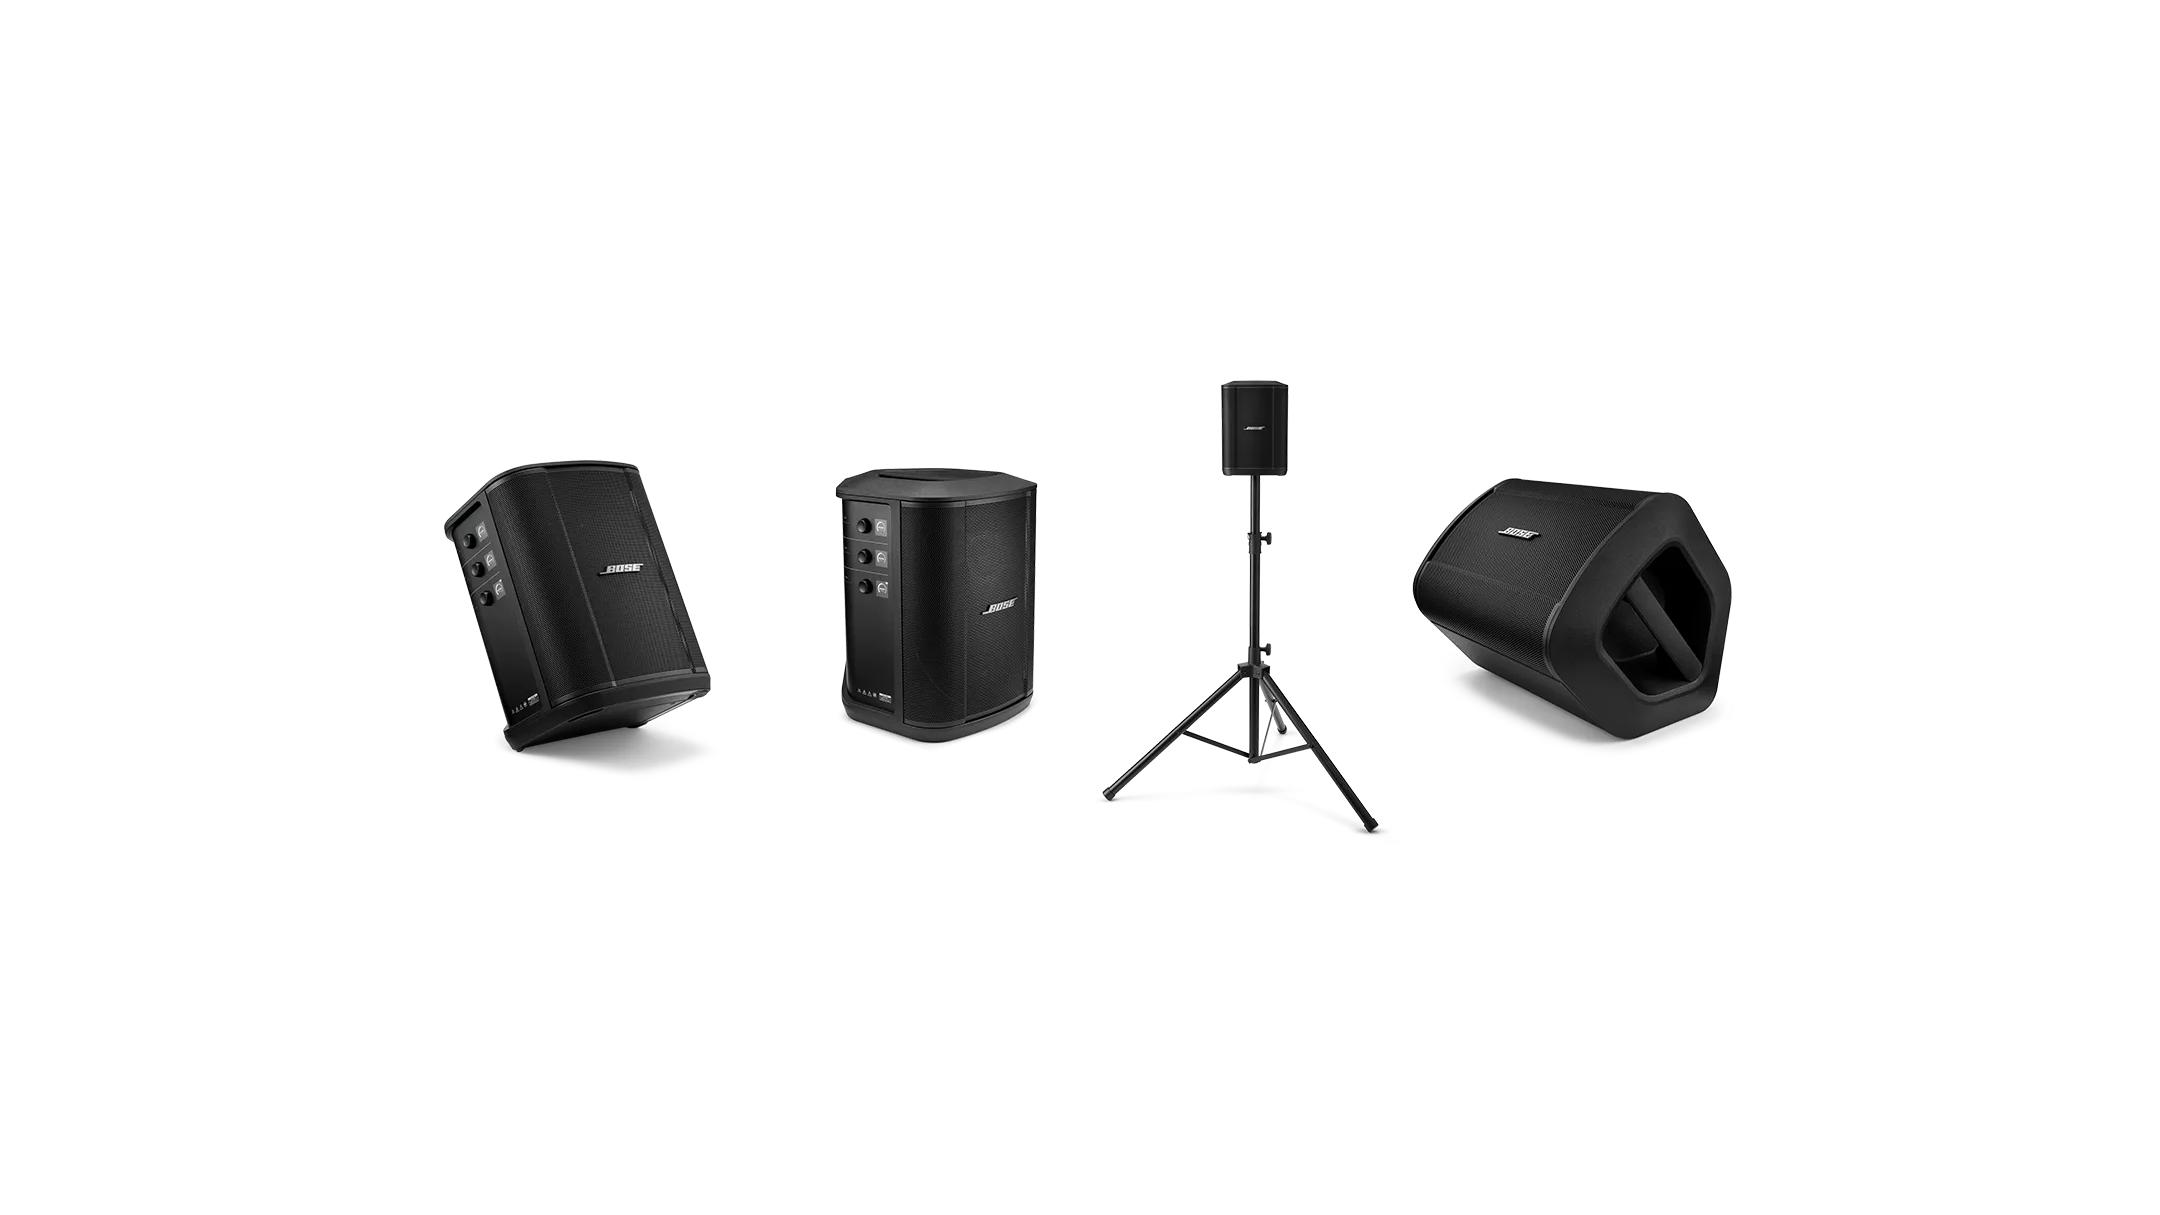 The S1 Pro+ Wireless PA System in four positioning options: tilted back on a floor, sitting vertically on a flat surface, mounted on a speaker stand, and on its side in monitor mode